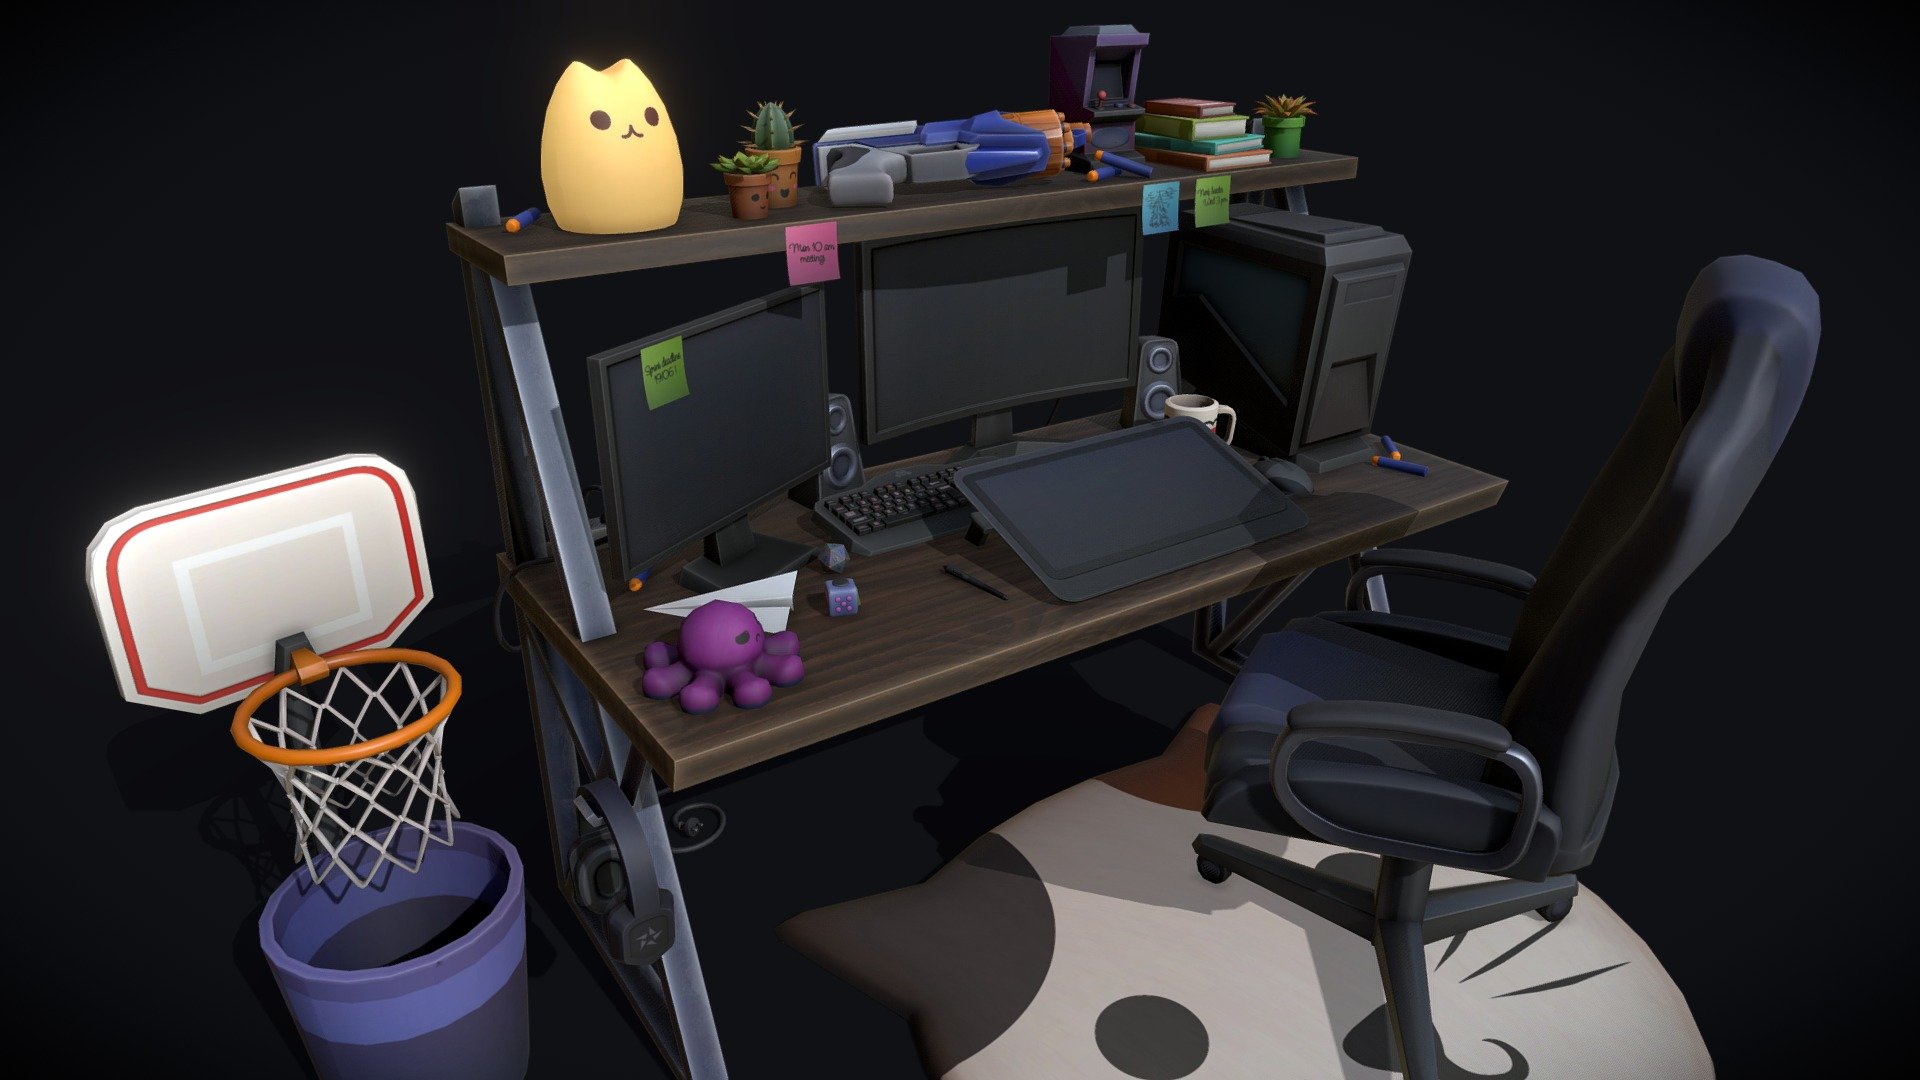 For an Into Games challenge regarding game development I created this scene of what I wish my desk would look like. Everything was modelled in Blender and textured in Substance Painter 3d model